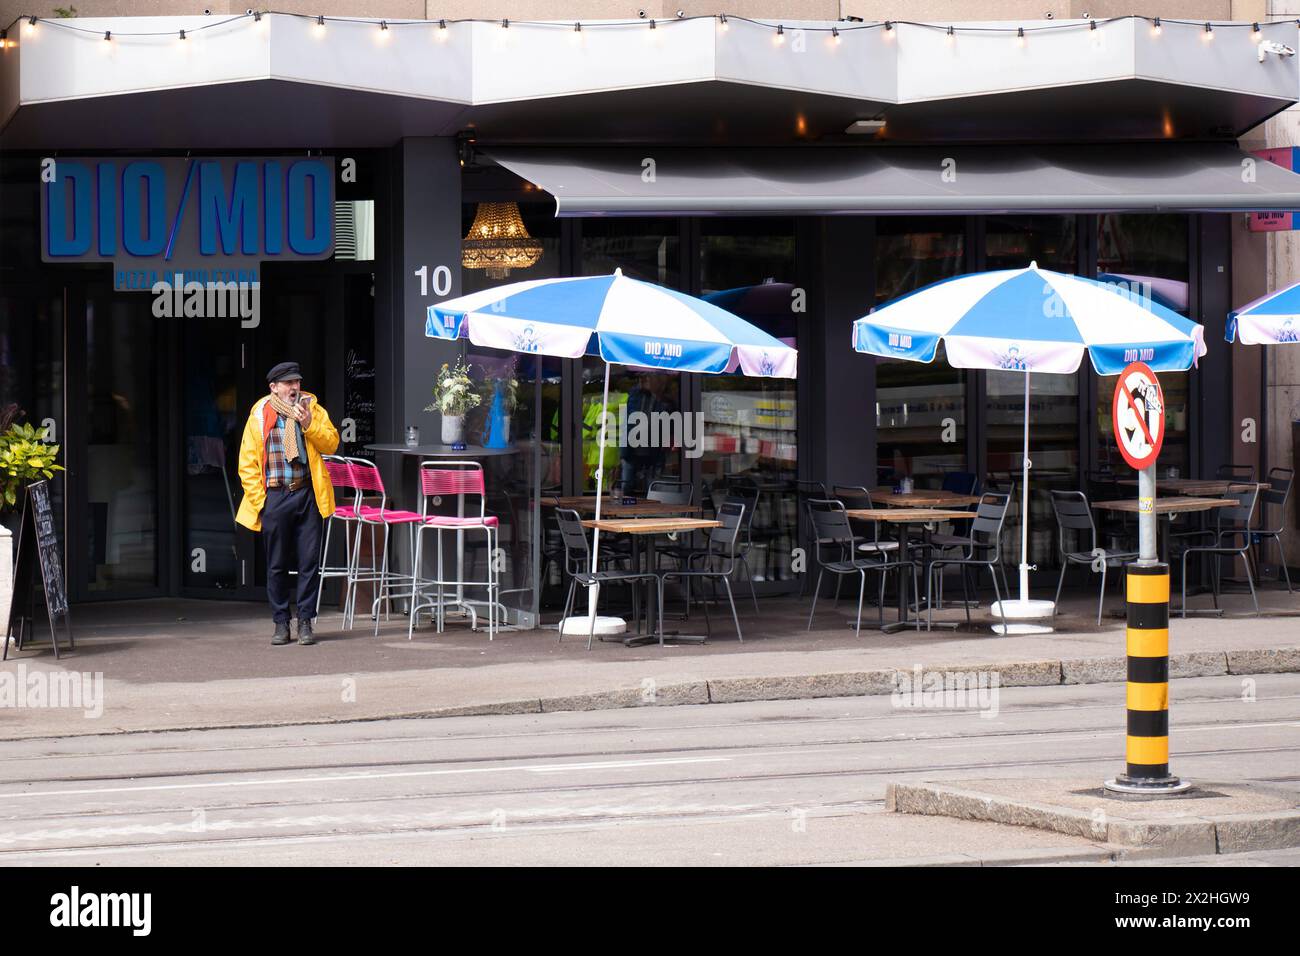 Basel, Switzerland - April 18, 2024: One man standing on the sidewalk in front of restaurant with outdoor seating and umbrellas Stock Photo